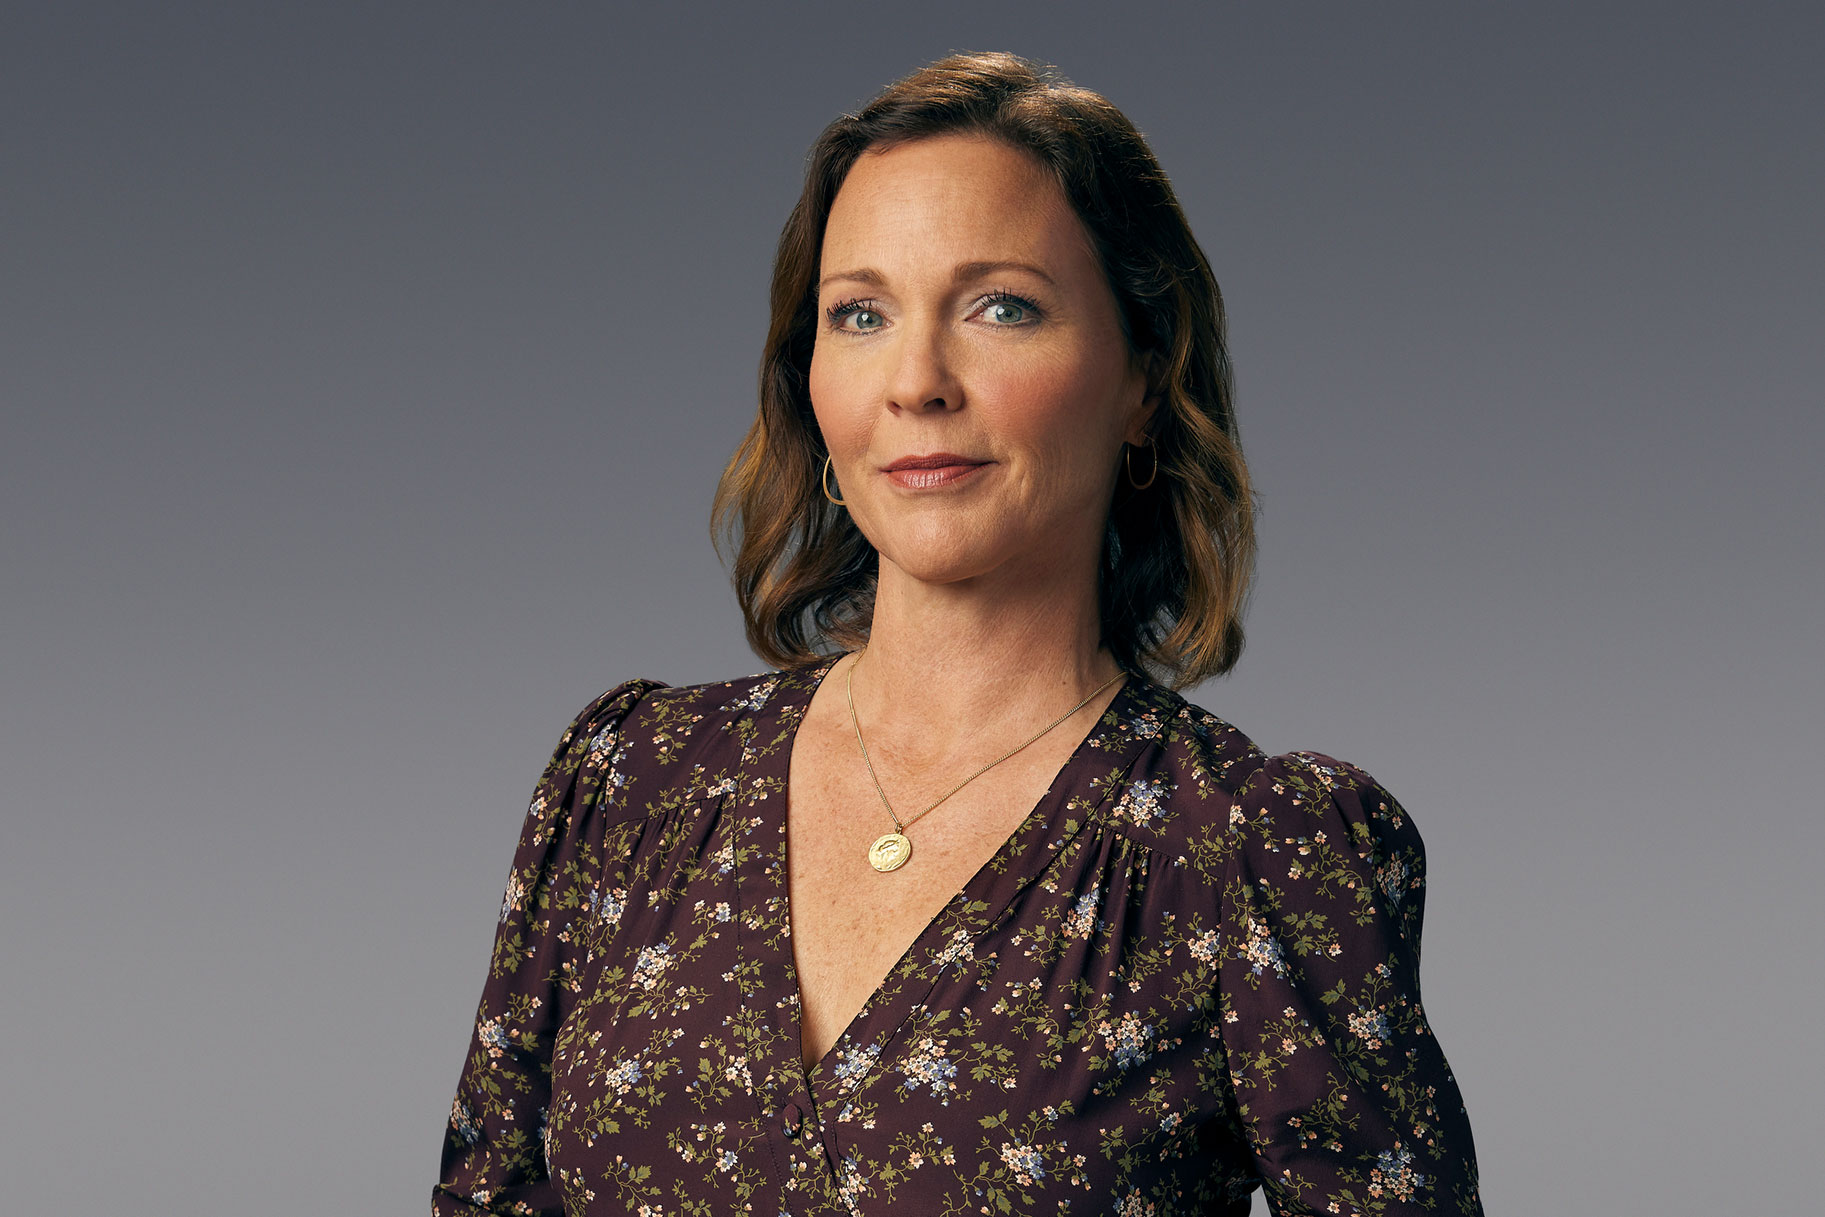 Kelli williams movies and tv shows